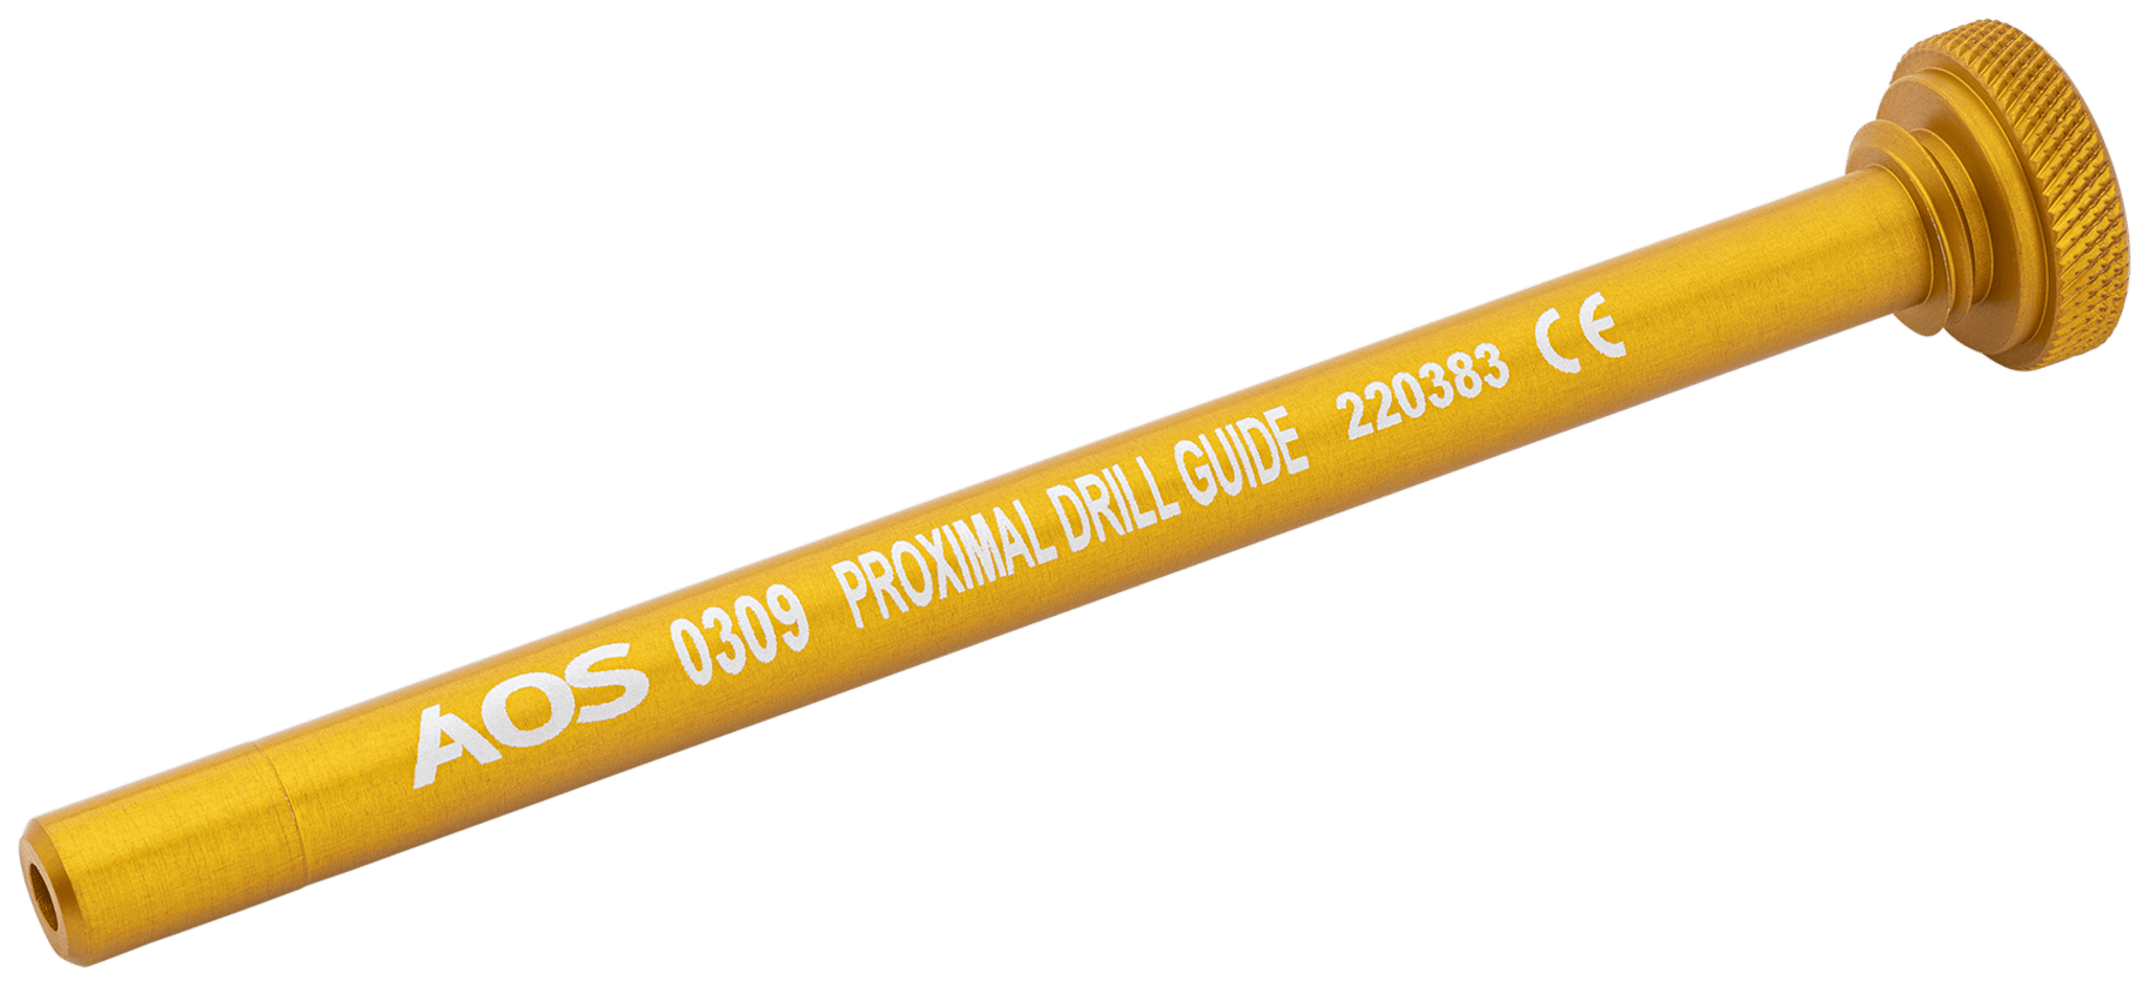 Drill Guide, Gold, 3.5 mm